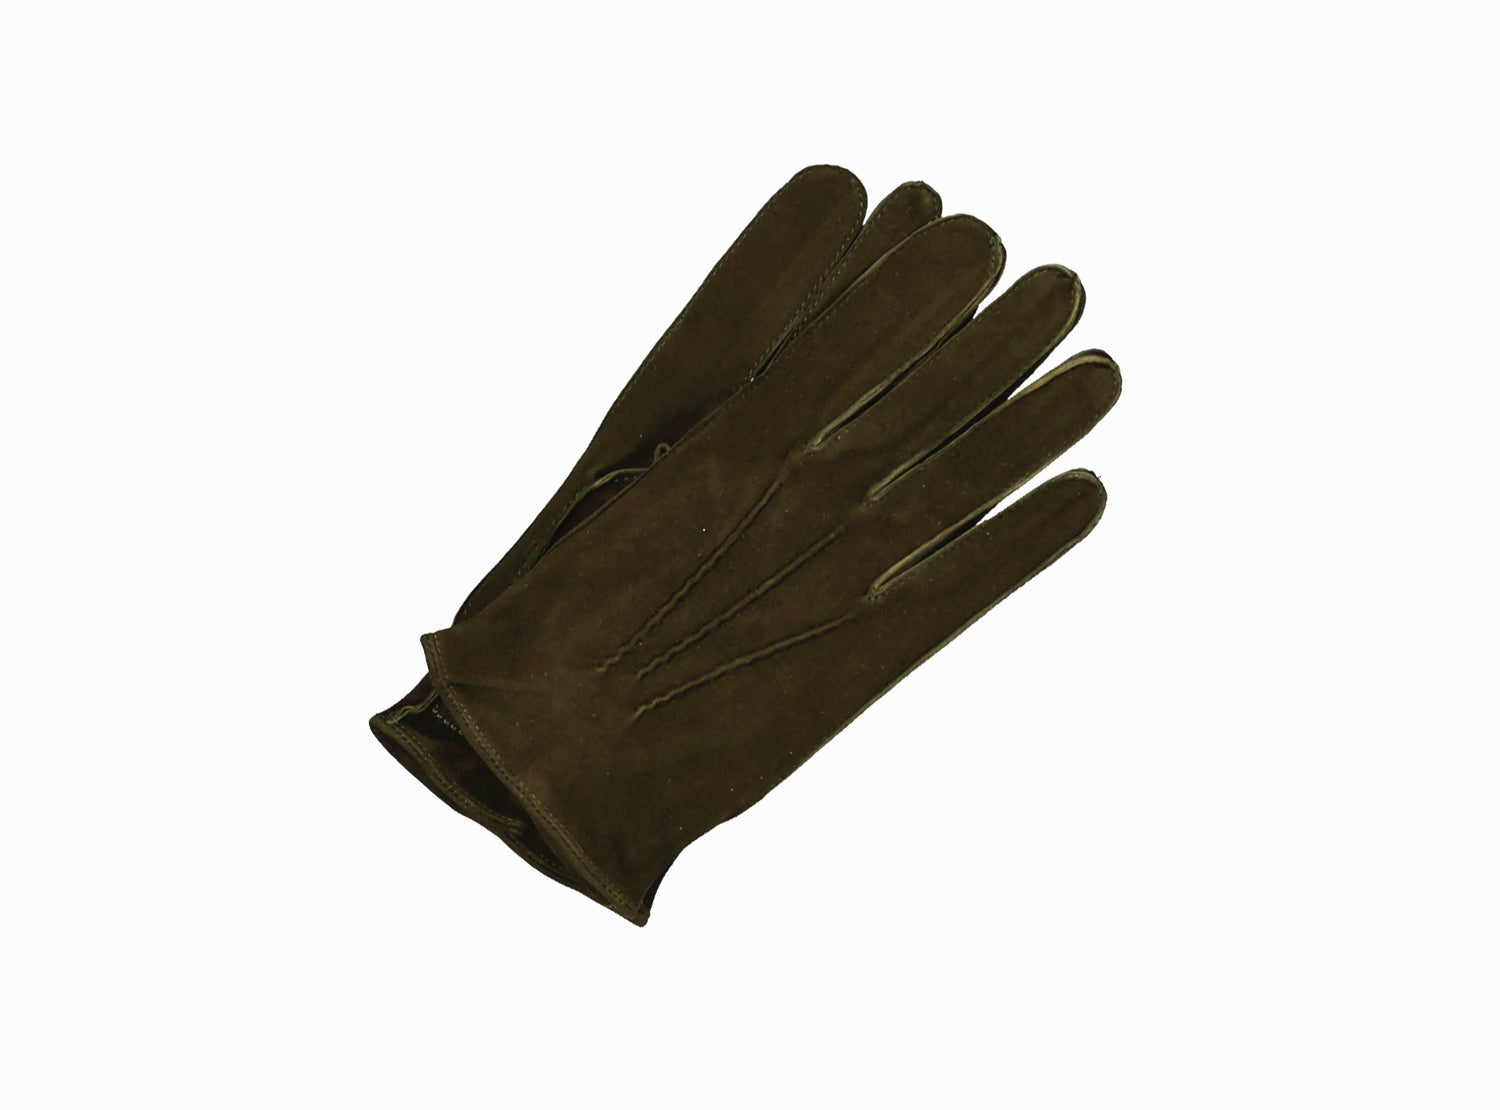 Sauso for Turo Reindeer Suede Gloves in Olive Green (7856772088030)